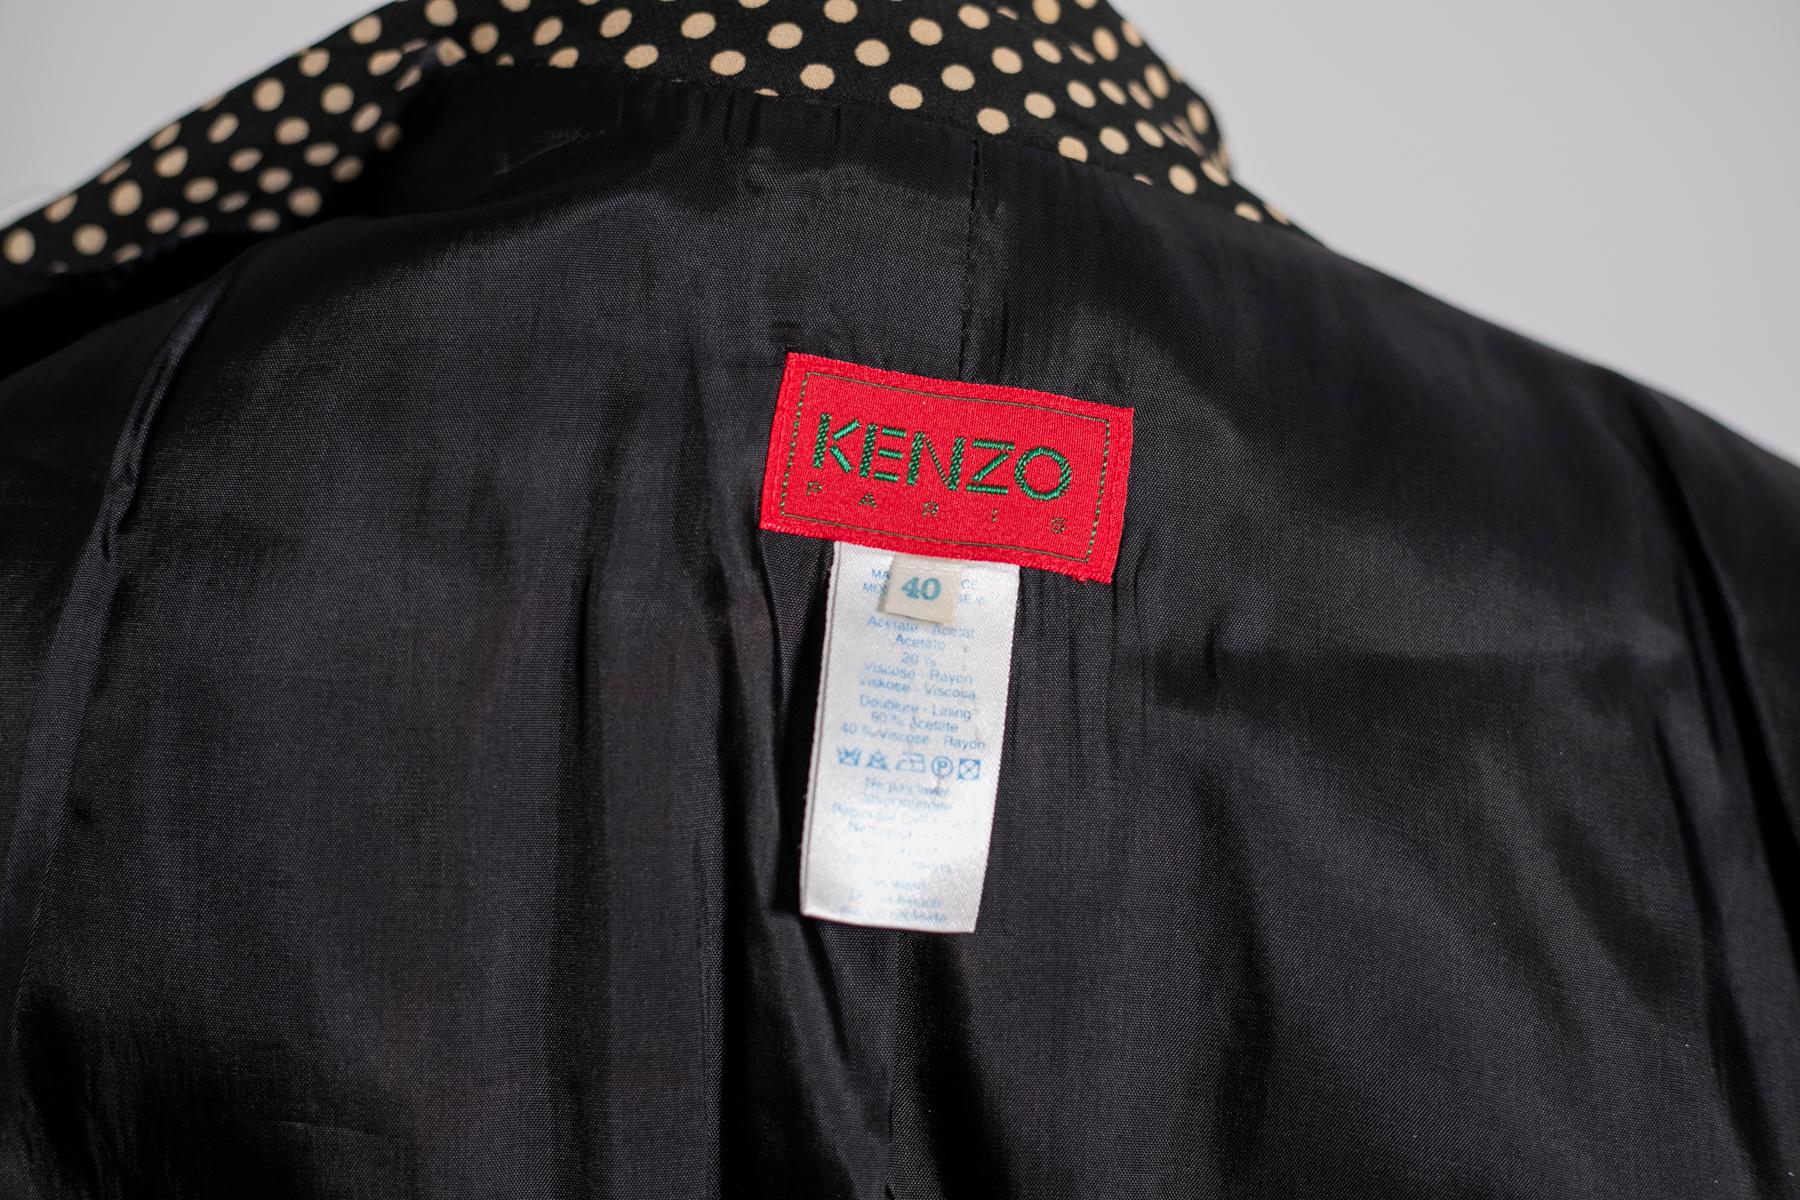 Shiny elegant polka-dot blazer by Kenzo from the 1980s, made in France. ORIGINAL LABELS.
The blazer has the classic elegant straight cut, down to the hips.
It has long delicate sleeves adorned with three black buttons. The collar has the classic